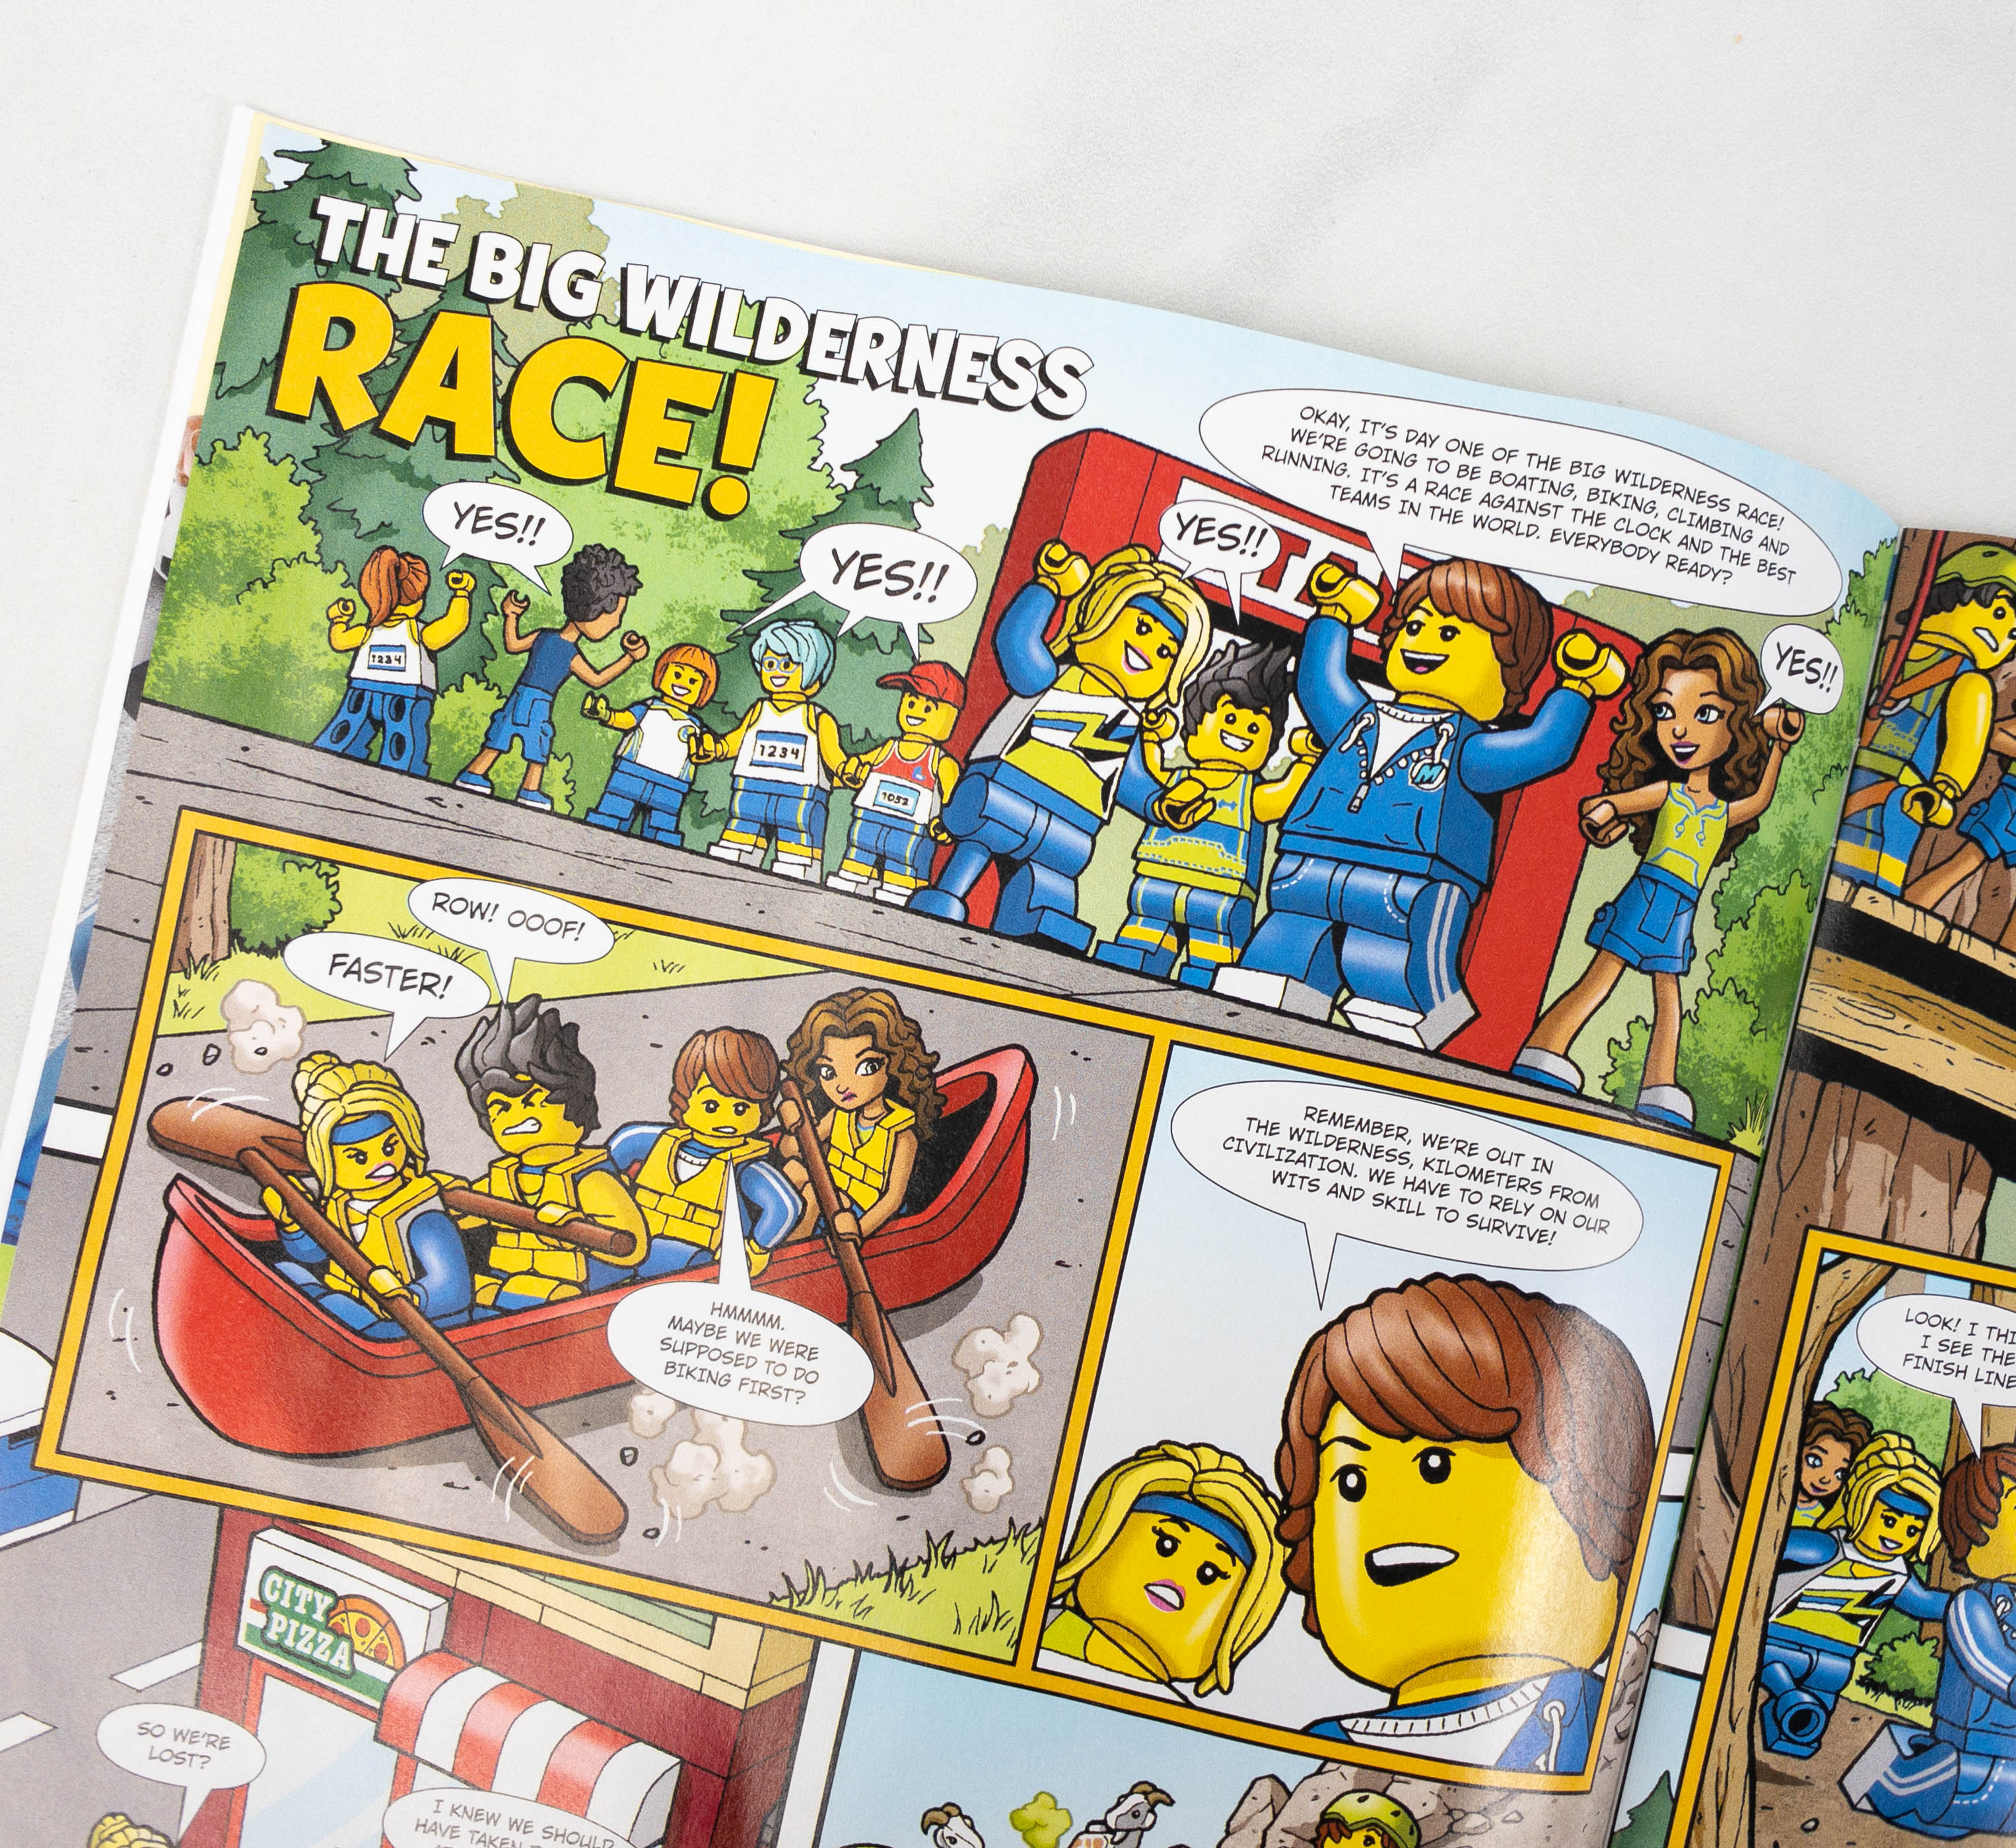 Get FREE LEGO Life Magazine for Kids 5-9 Years Old! - Hello Subscription